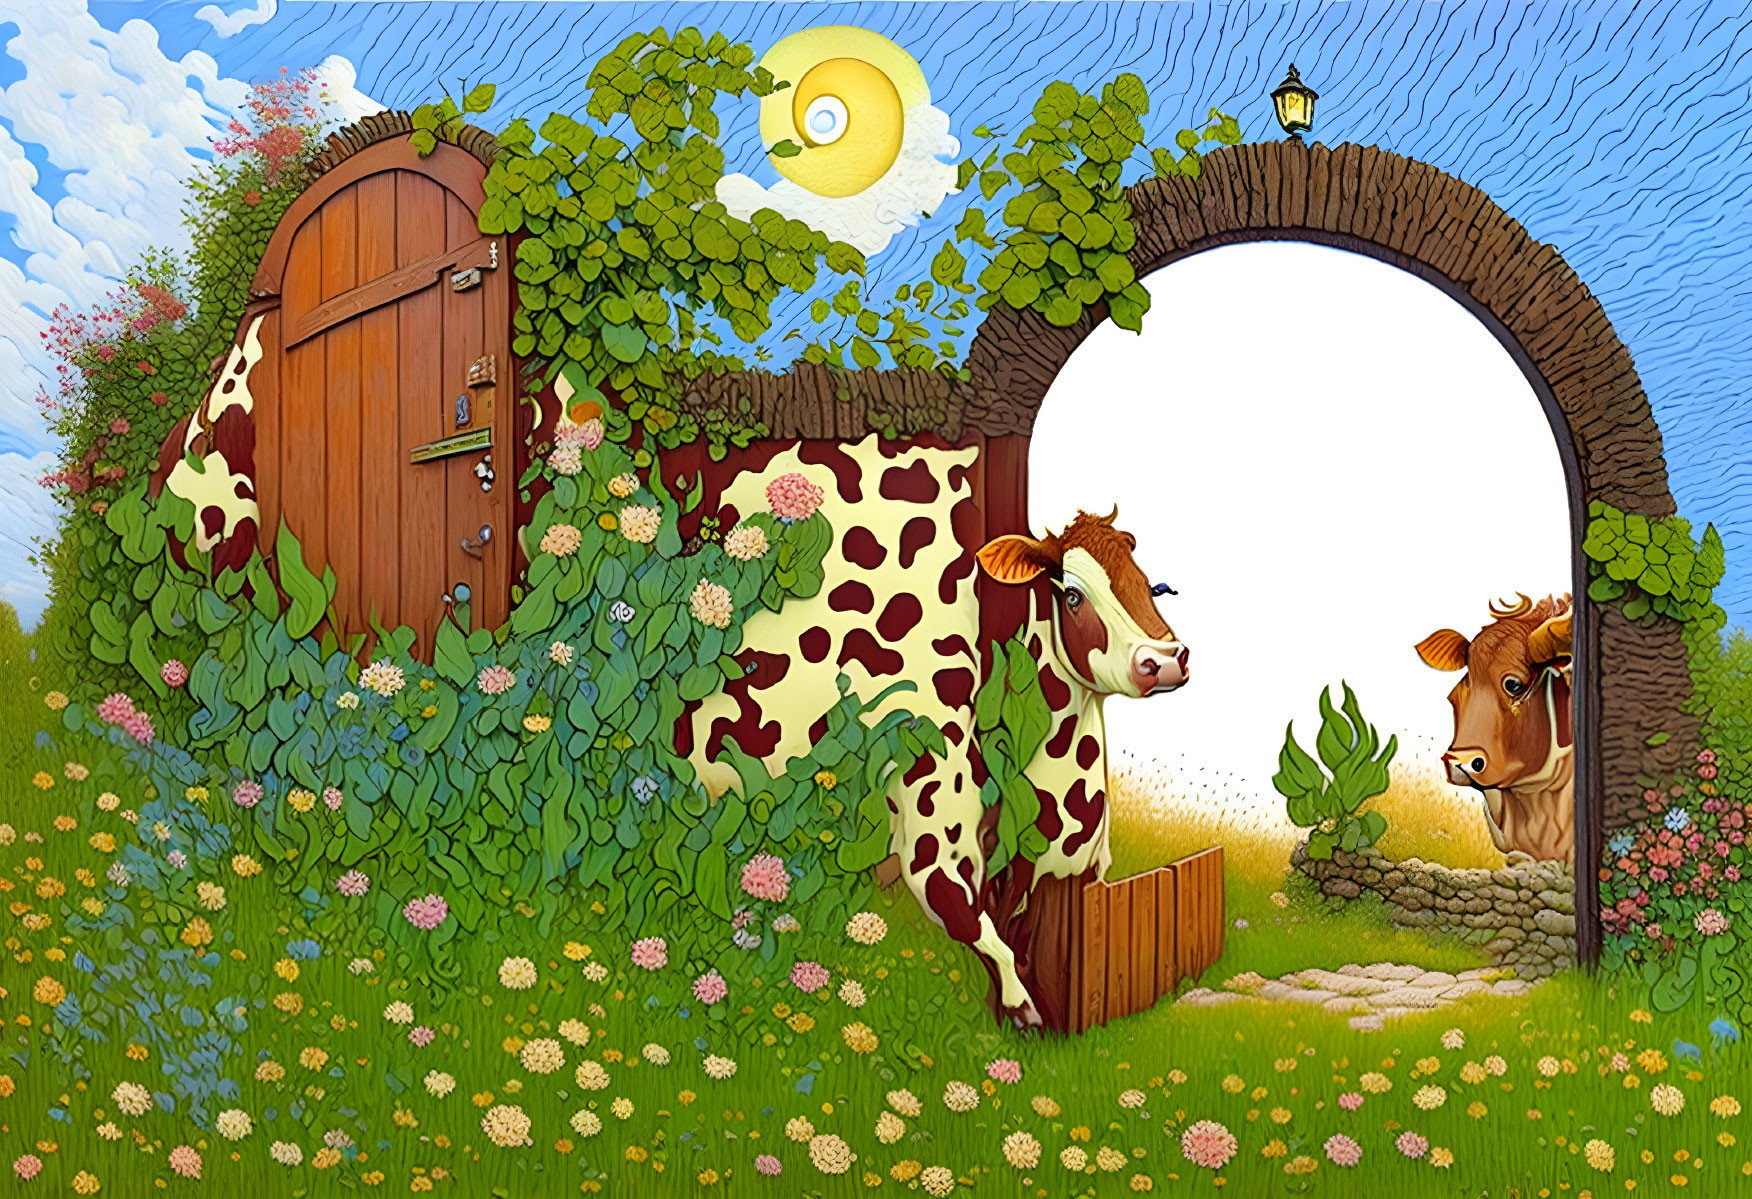 Whimsical scene with cows, round door, ivy, stone archway, flowers, and